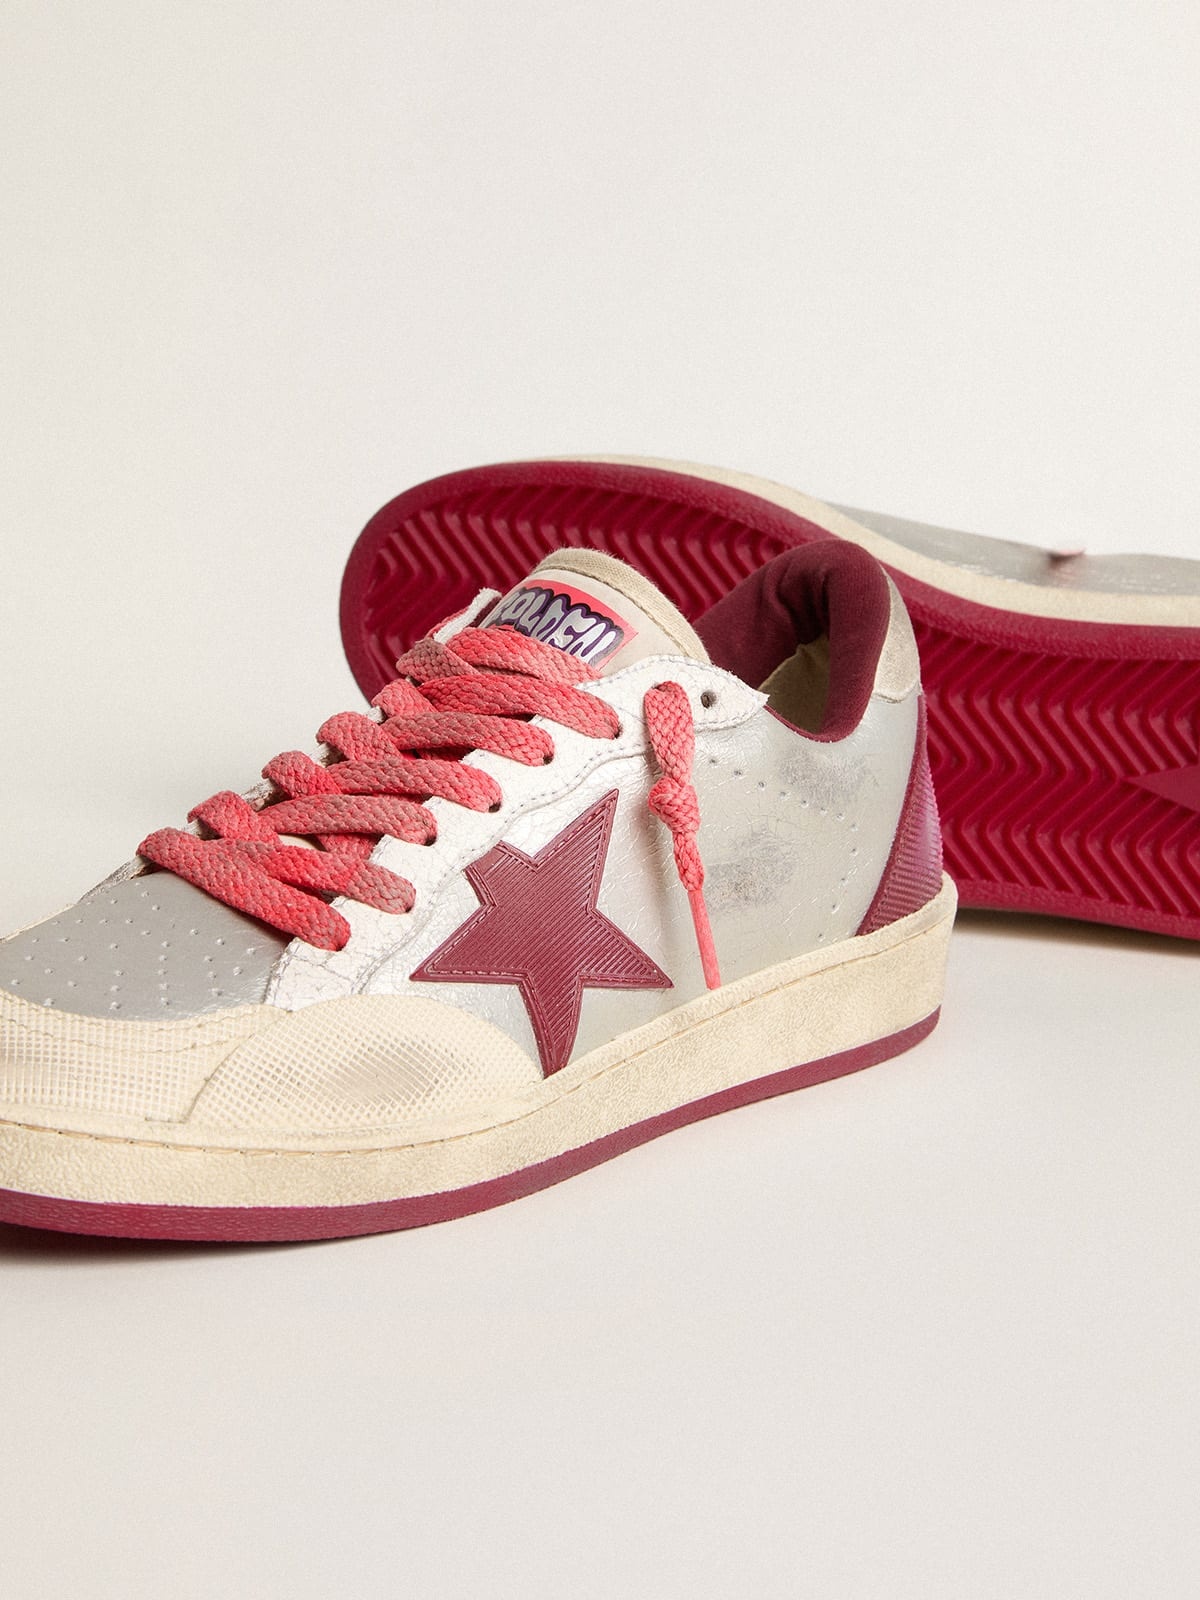 Women’s Ball Star Pro in silver crackle leather with burgundy star - 3